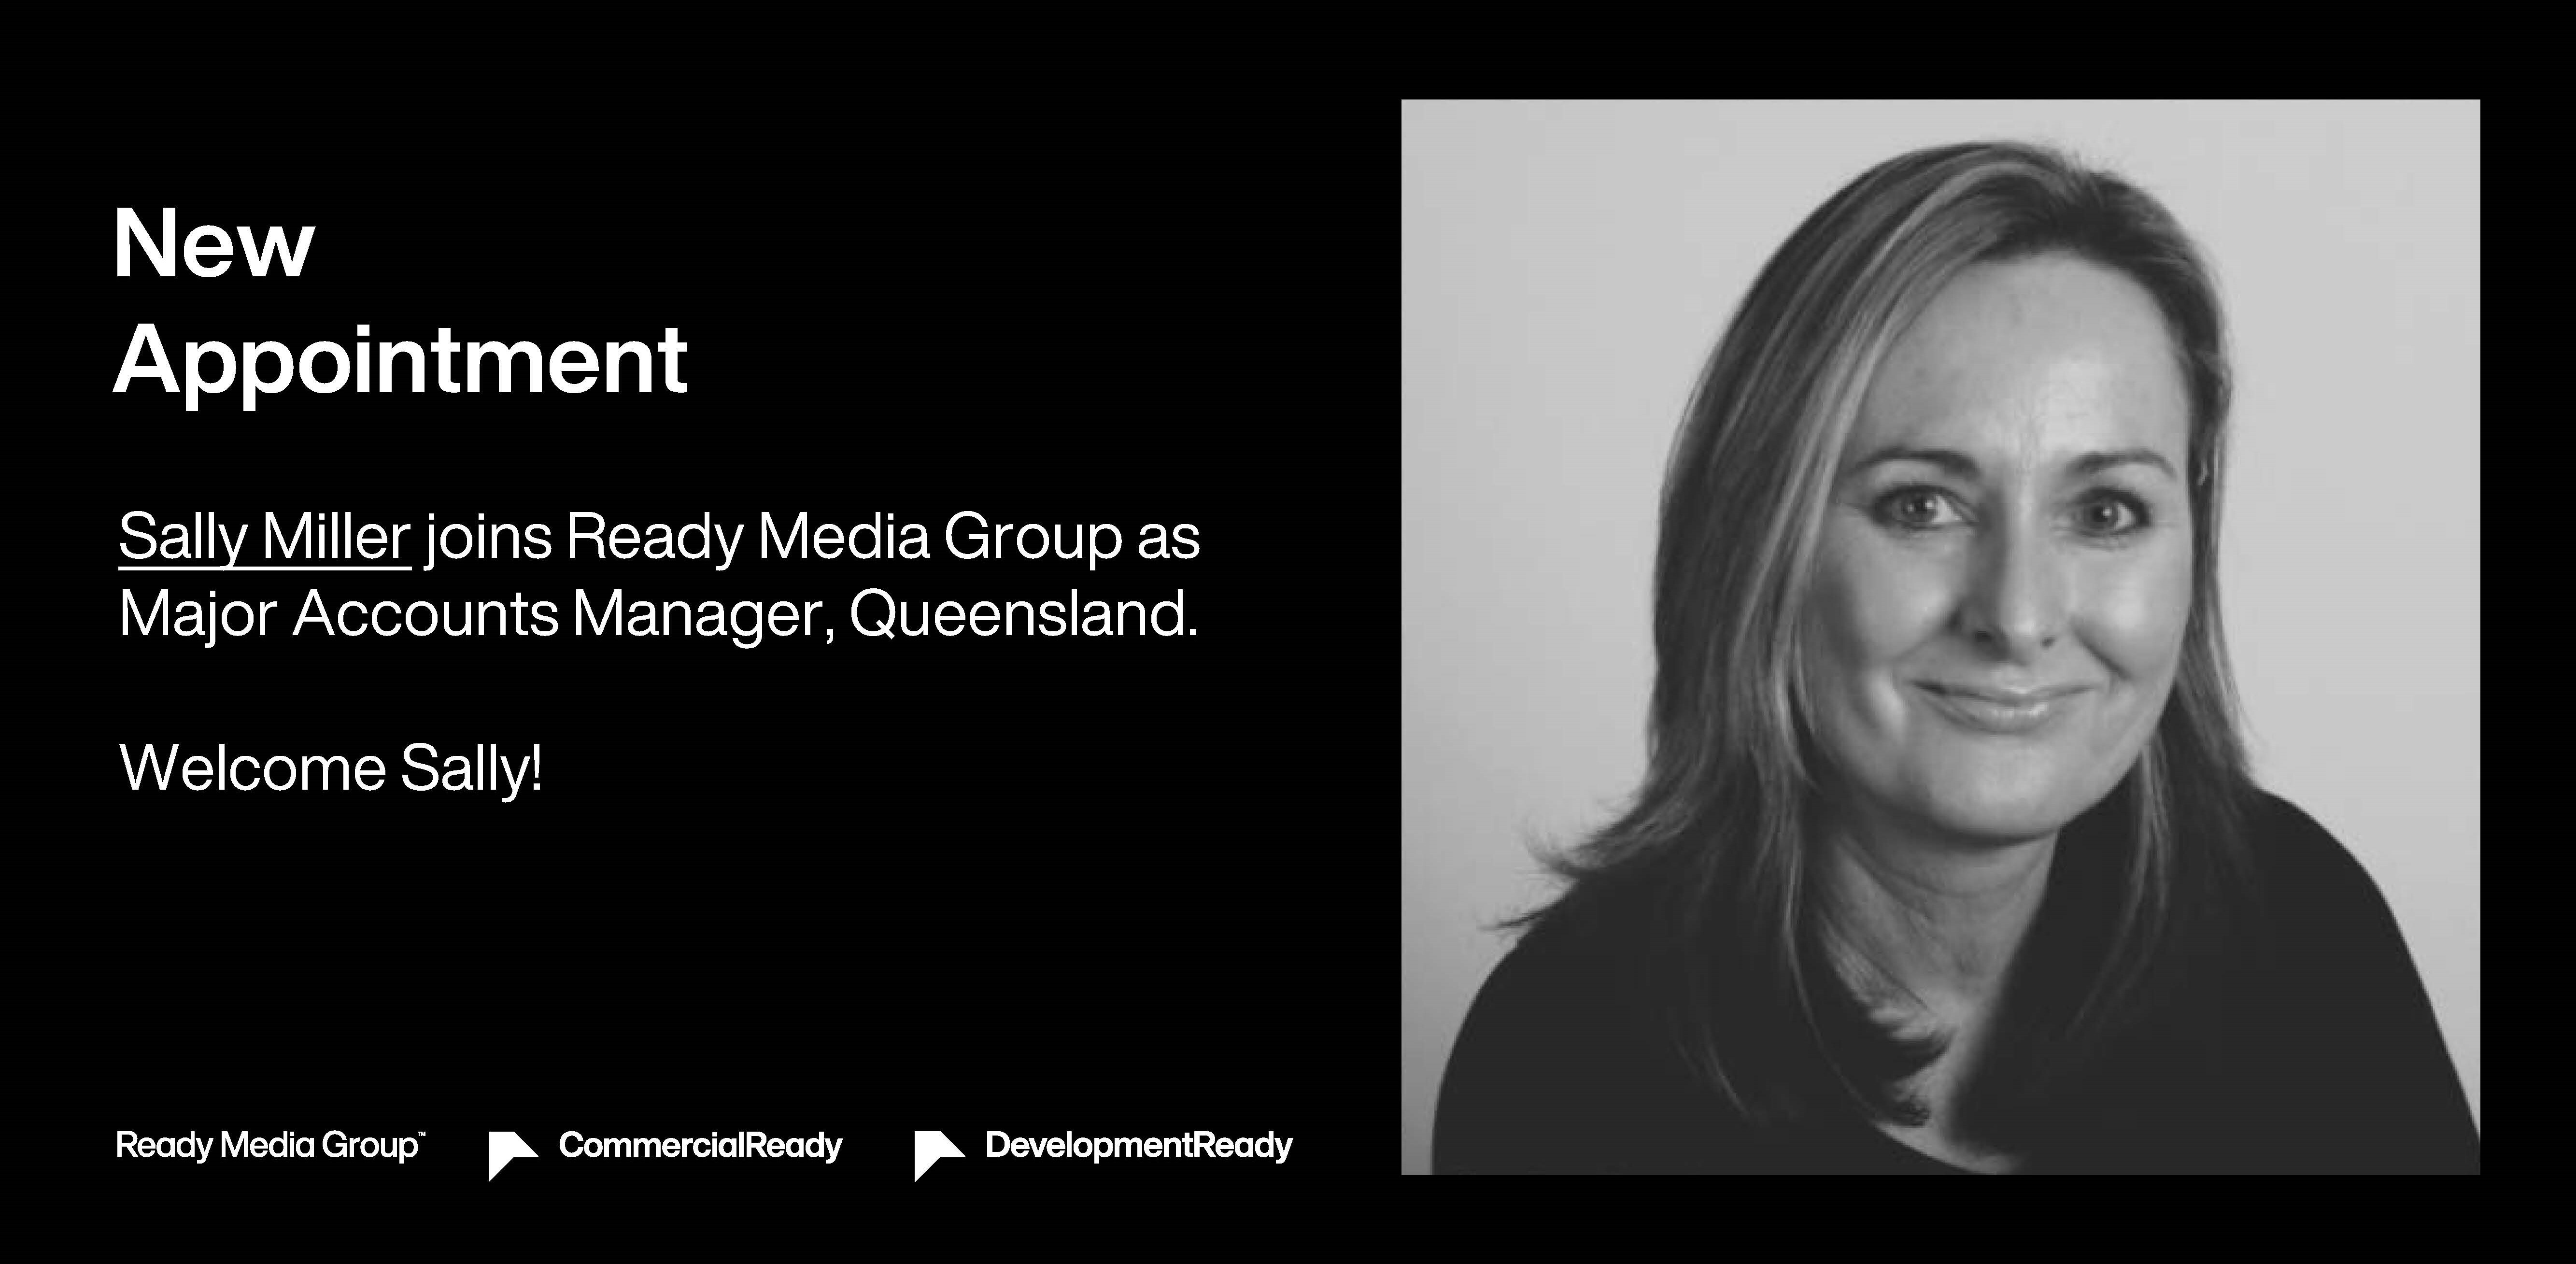 New Appointment - Sally Miller as Major Accounts Manager, Queensland.